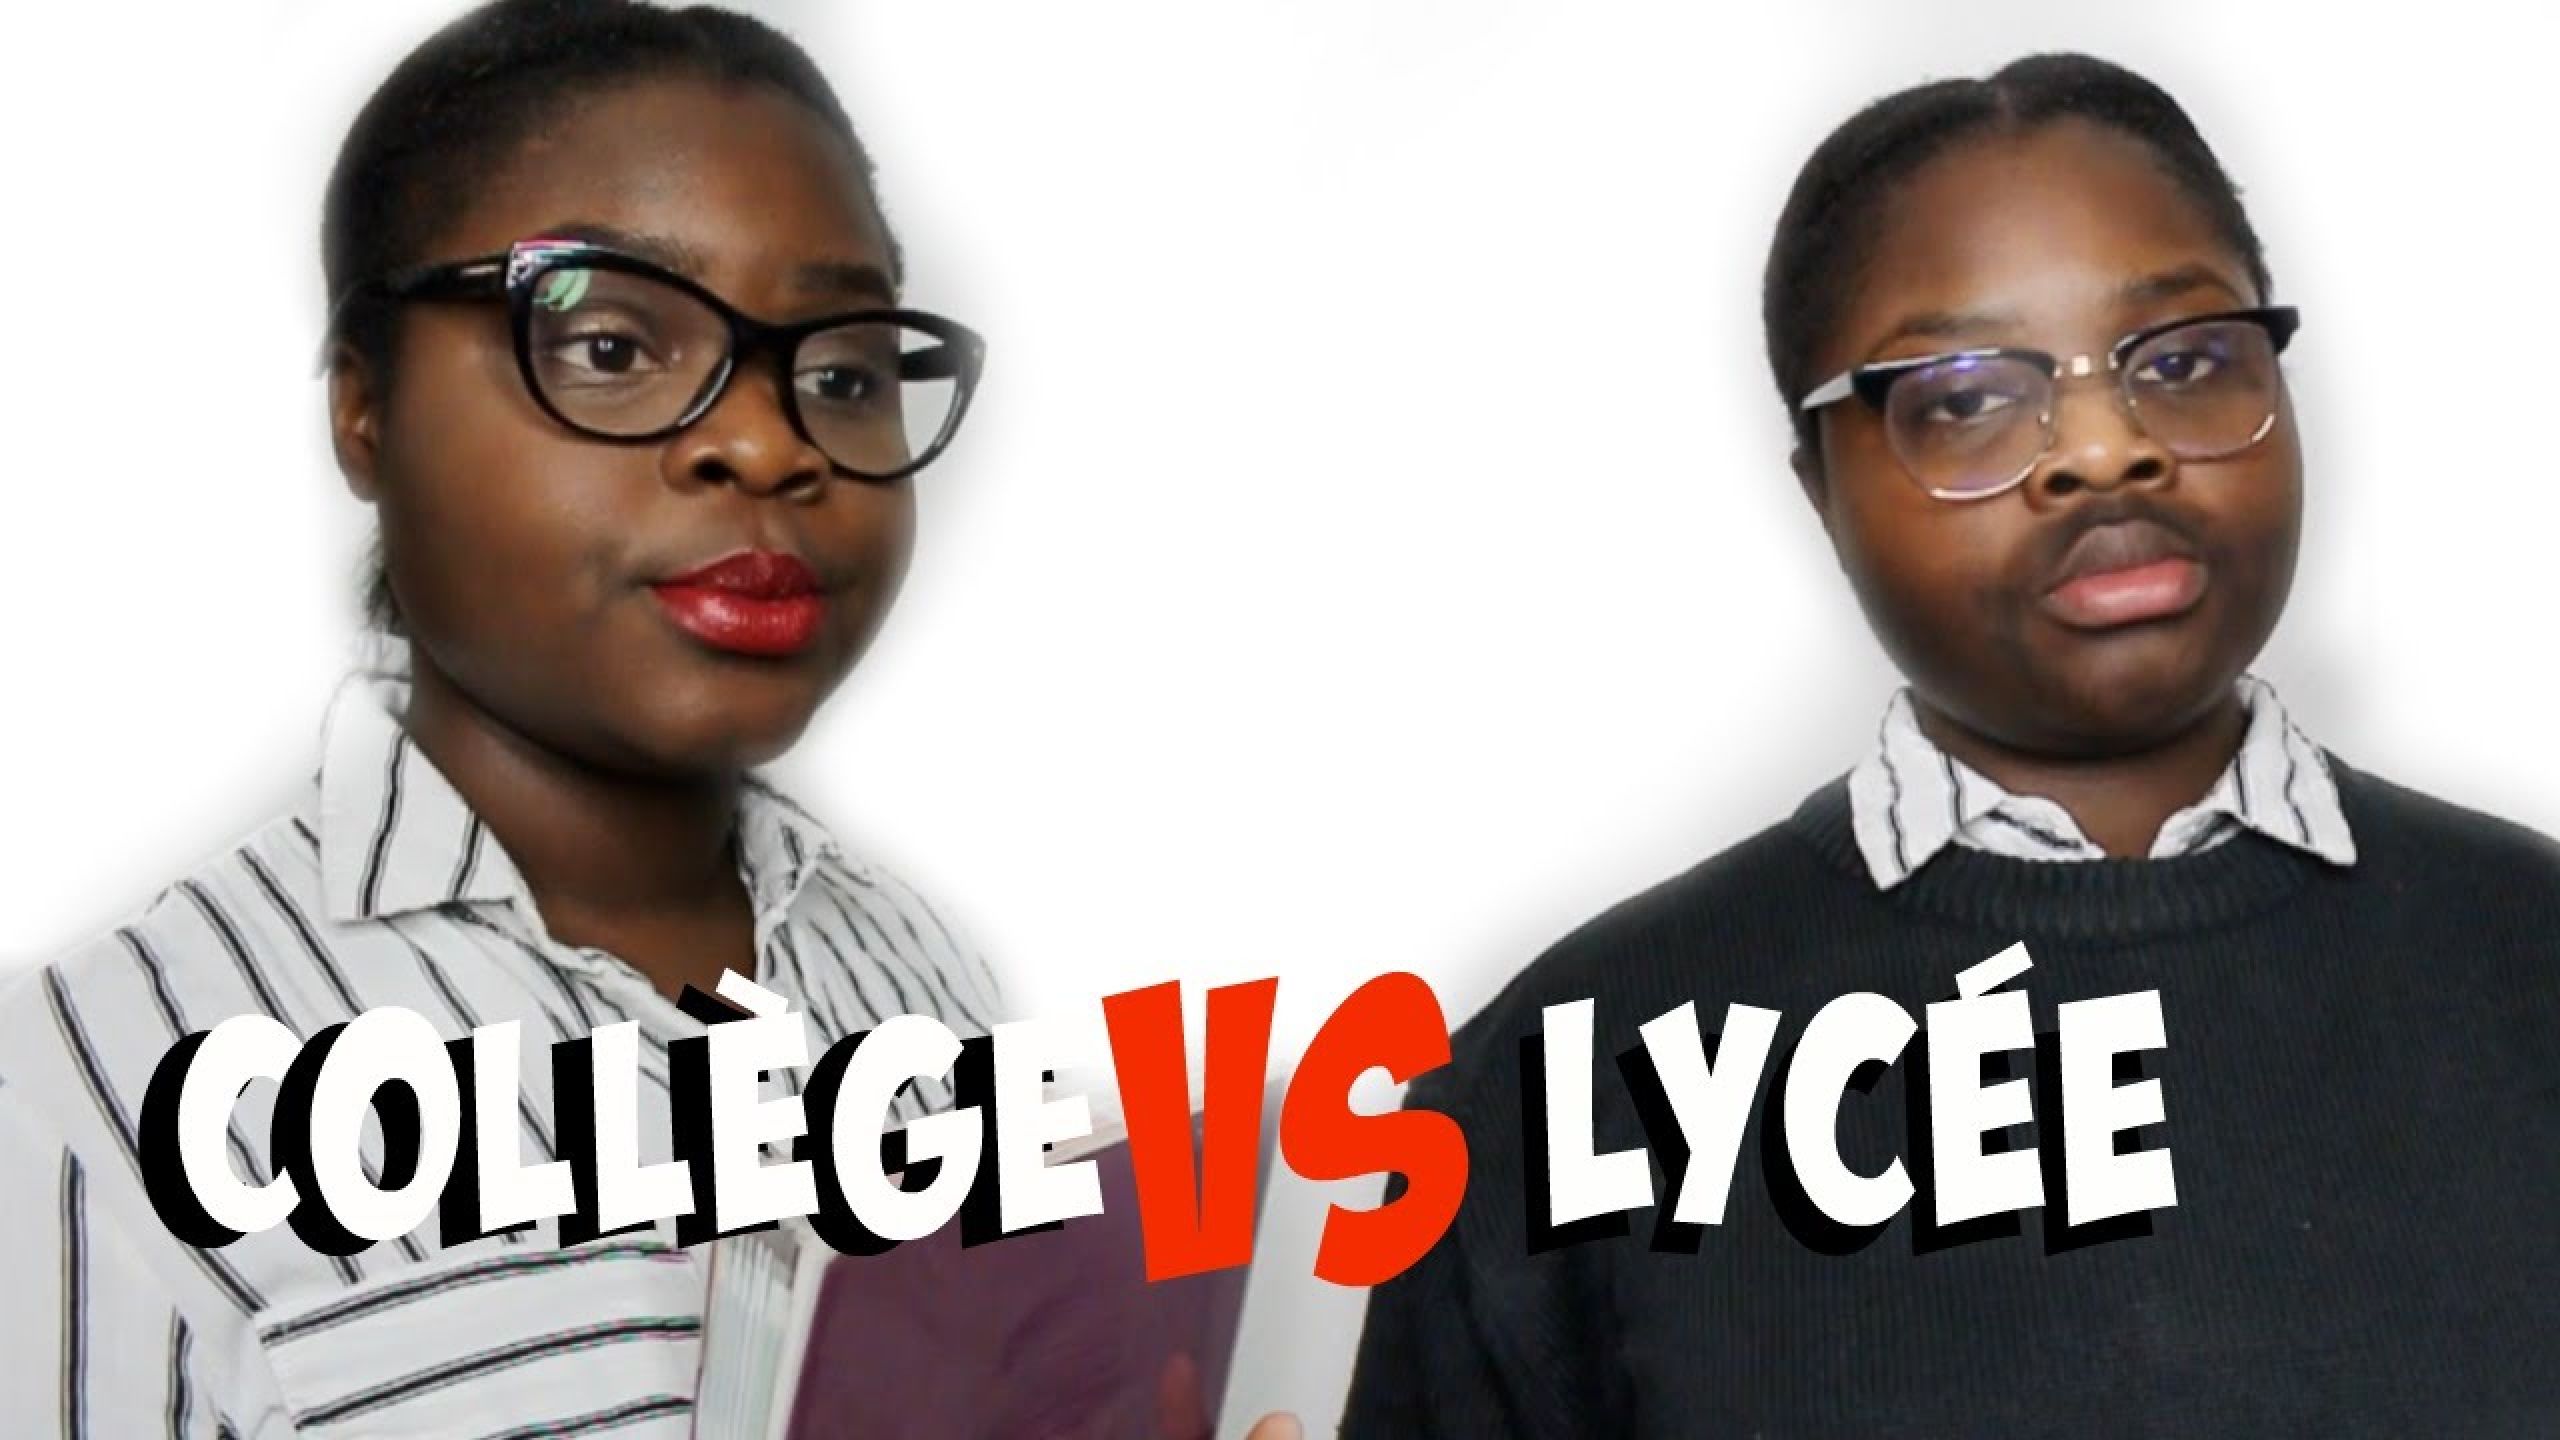 COLLÈGE VS LYCÉE: Clothes, Outfits, Brands, Style and Looks | Spotern